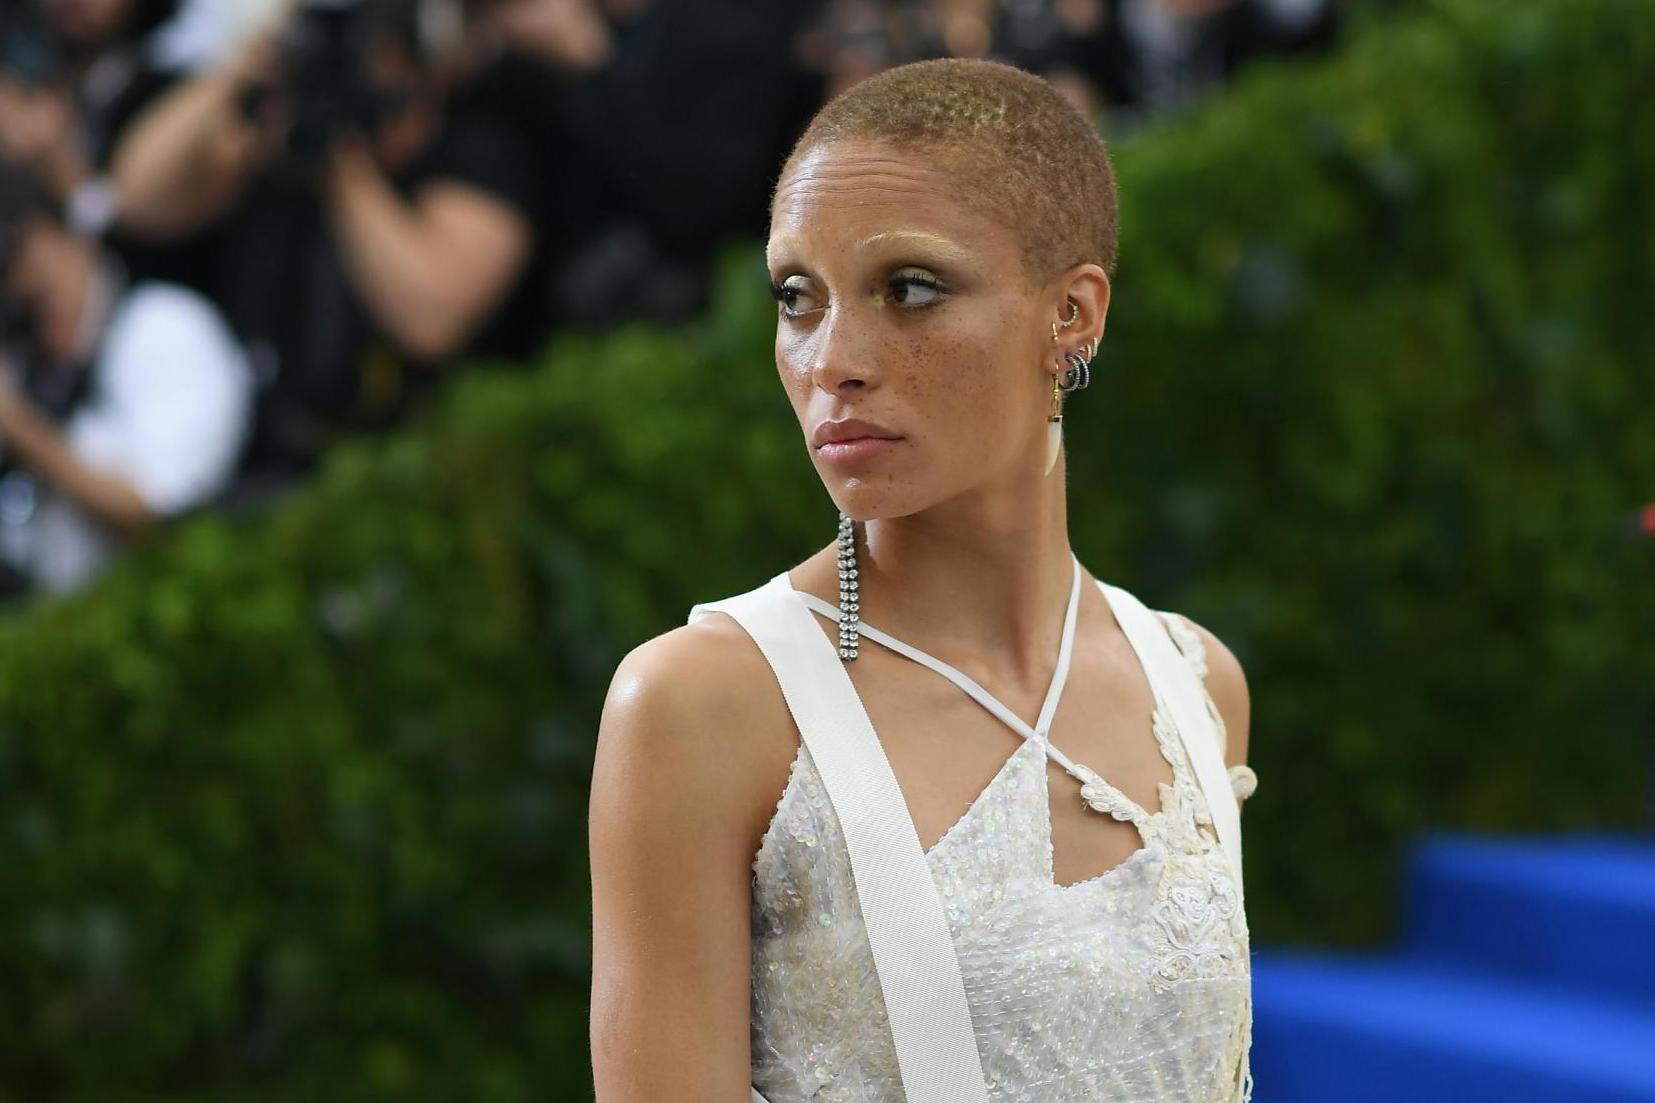 Met Gala: Fashion student who designed Adwoa Aboah’s gown aged 19 | The ...